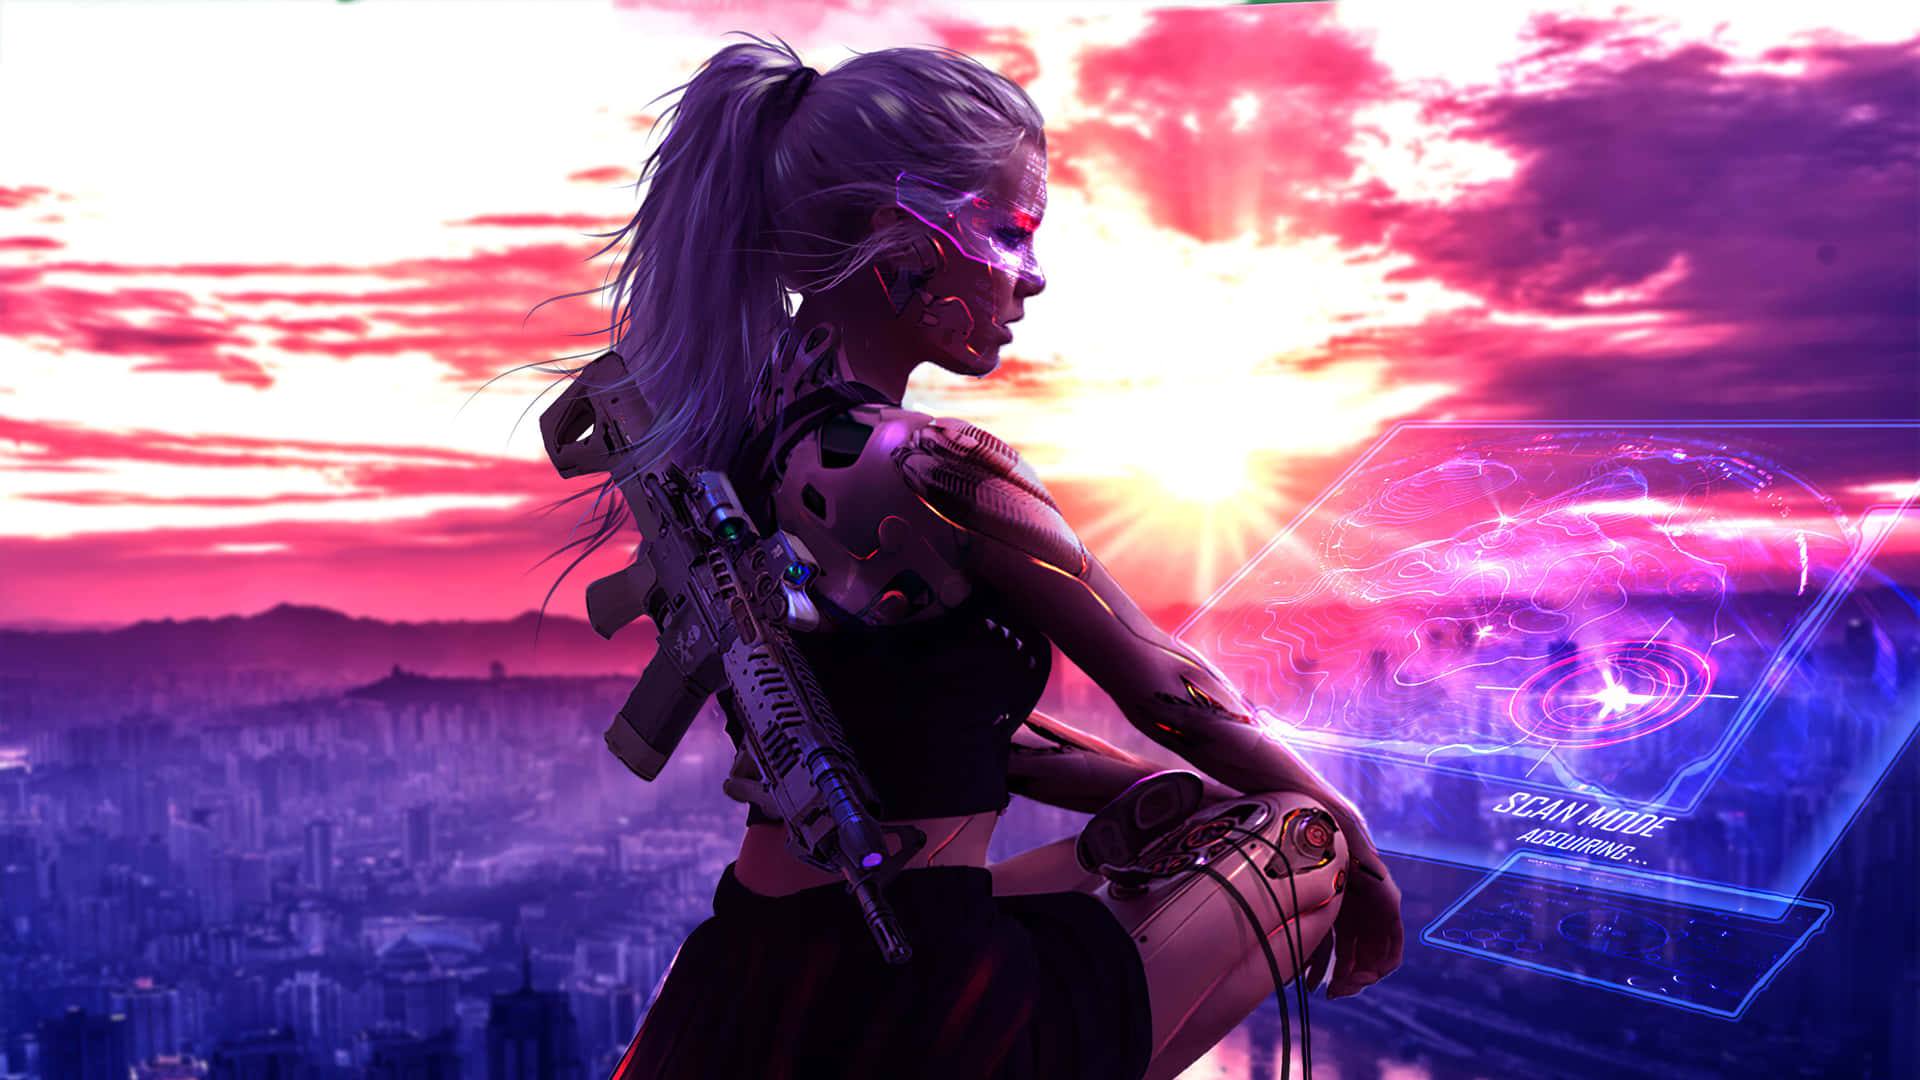 Explore The Neon-lit Cityscape Of A Cyberpunk World Lit Up By Neon-lights.